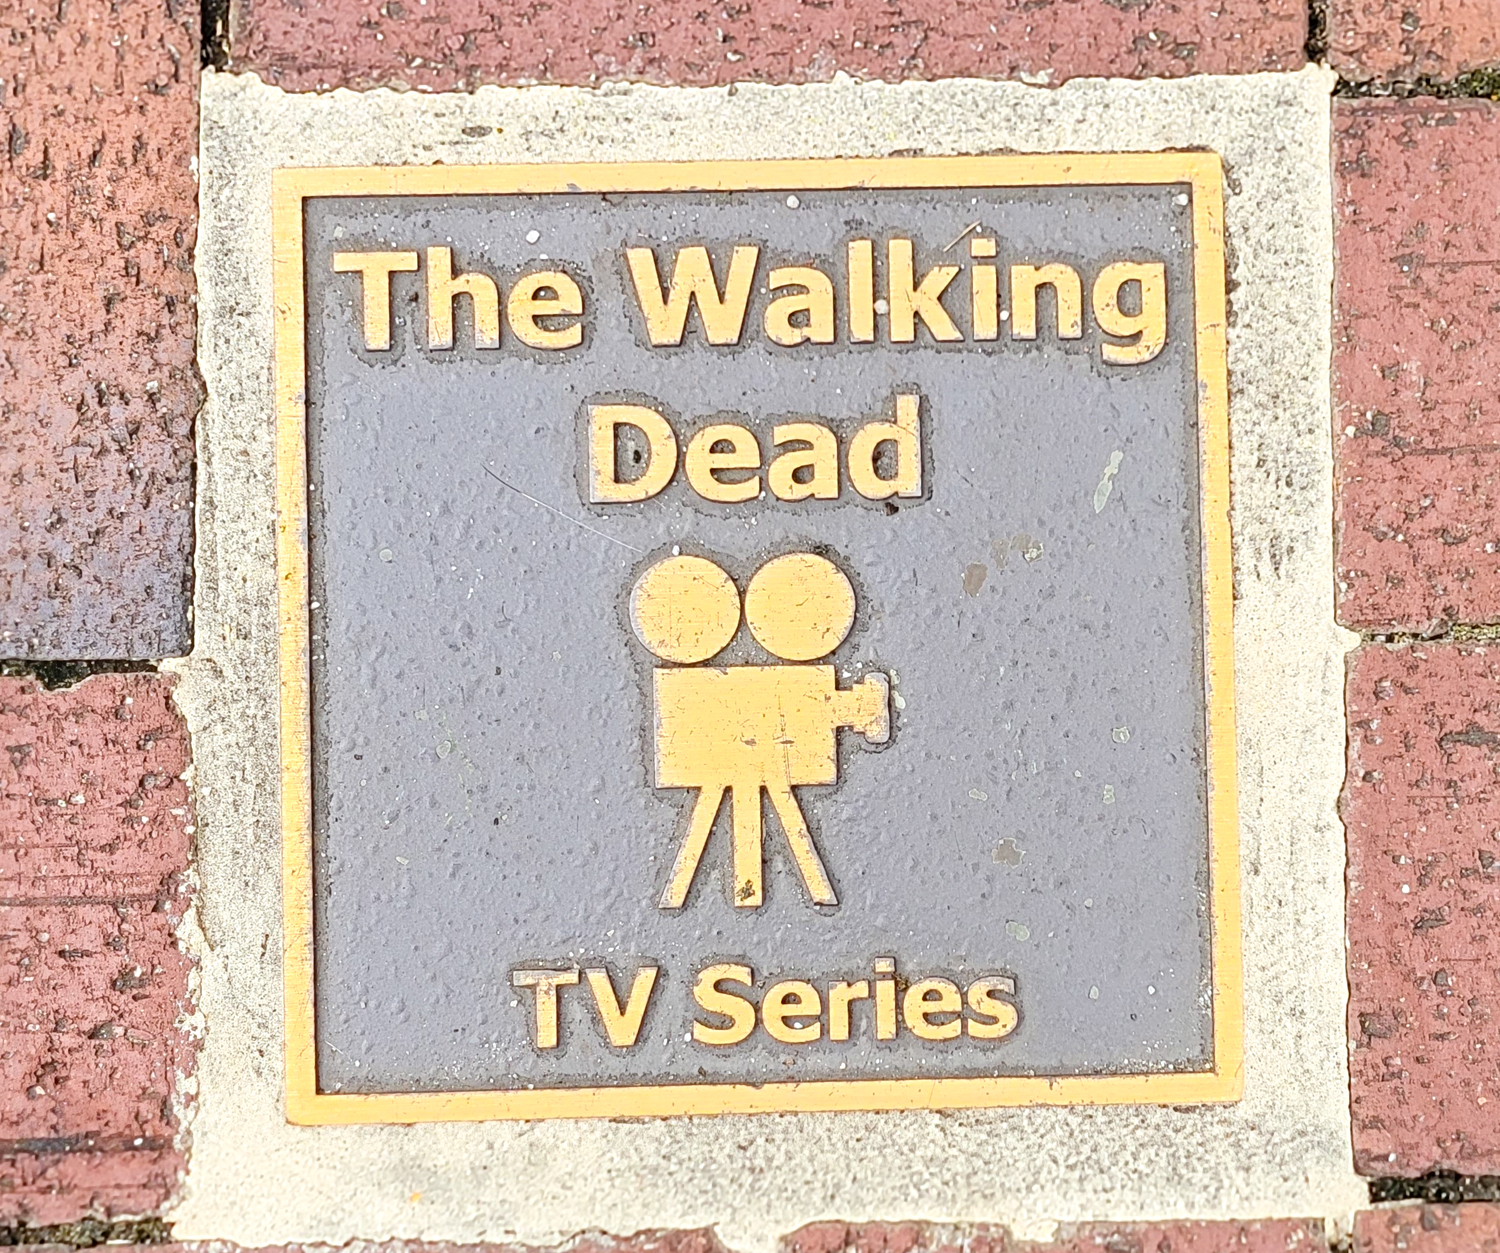 The Walking Dead town path paver showing famous filming locations in georgia